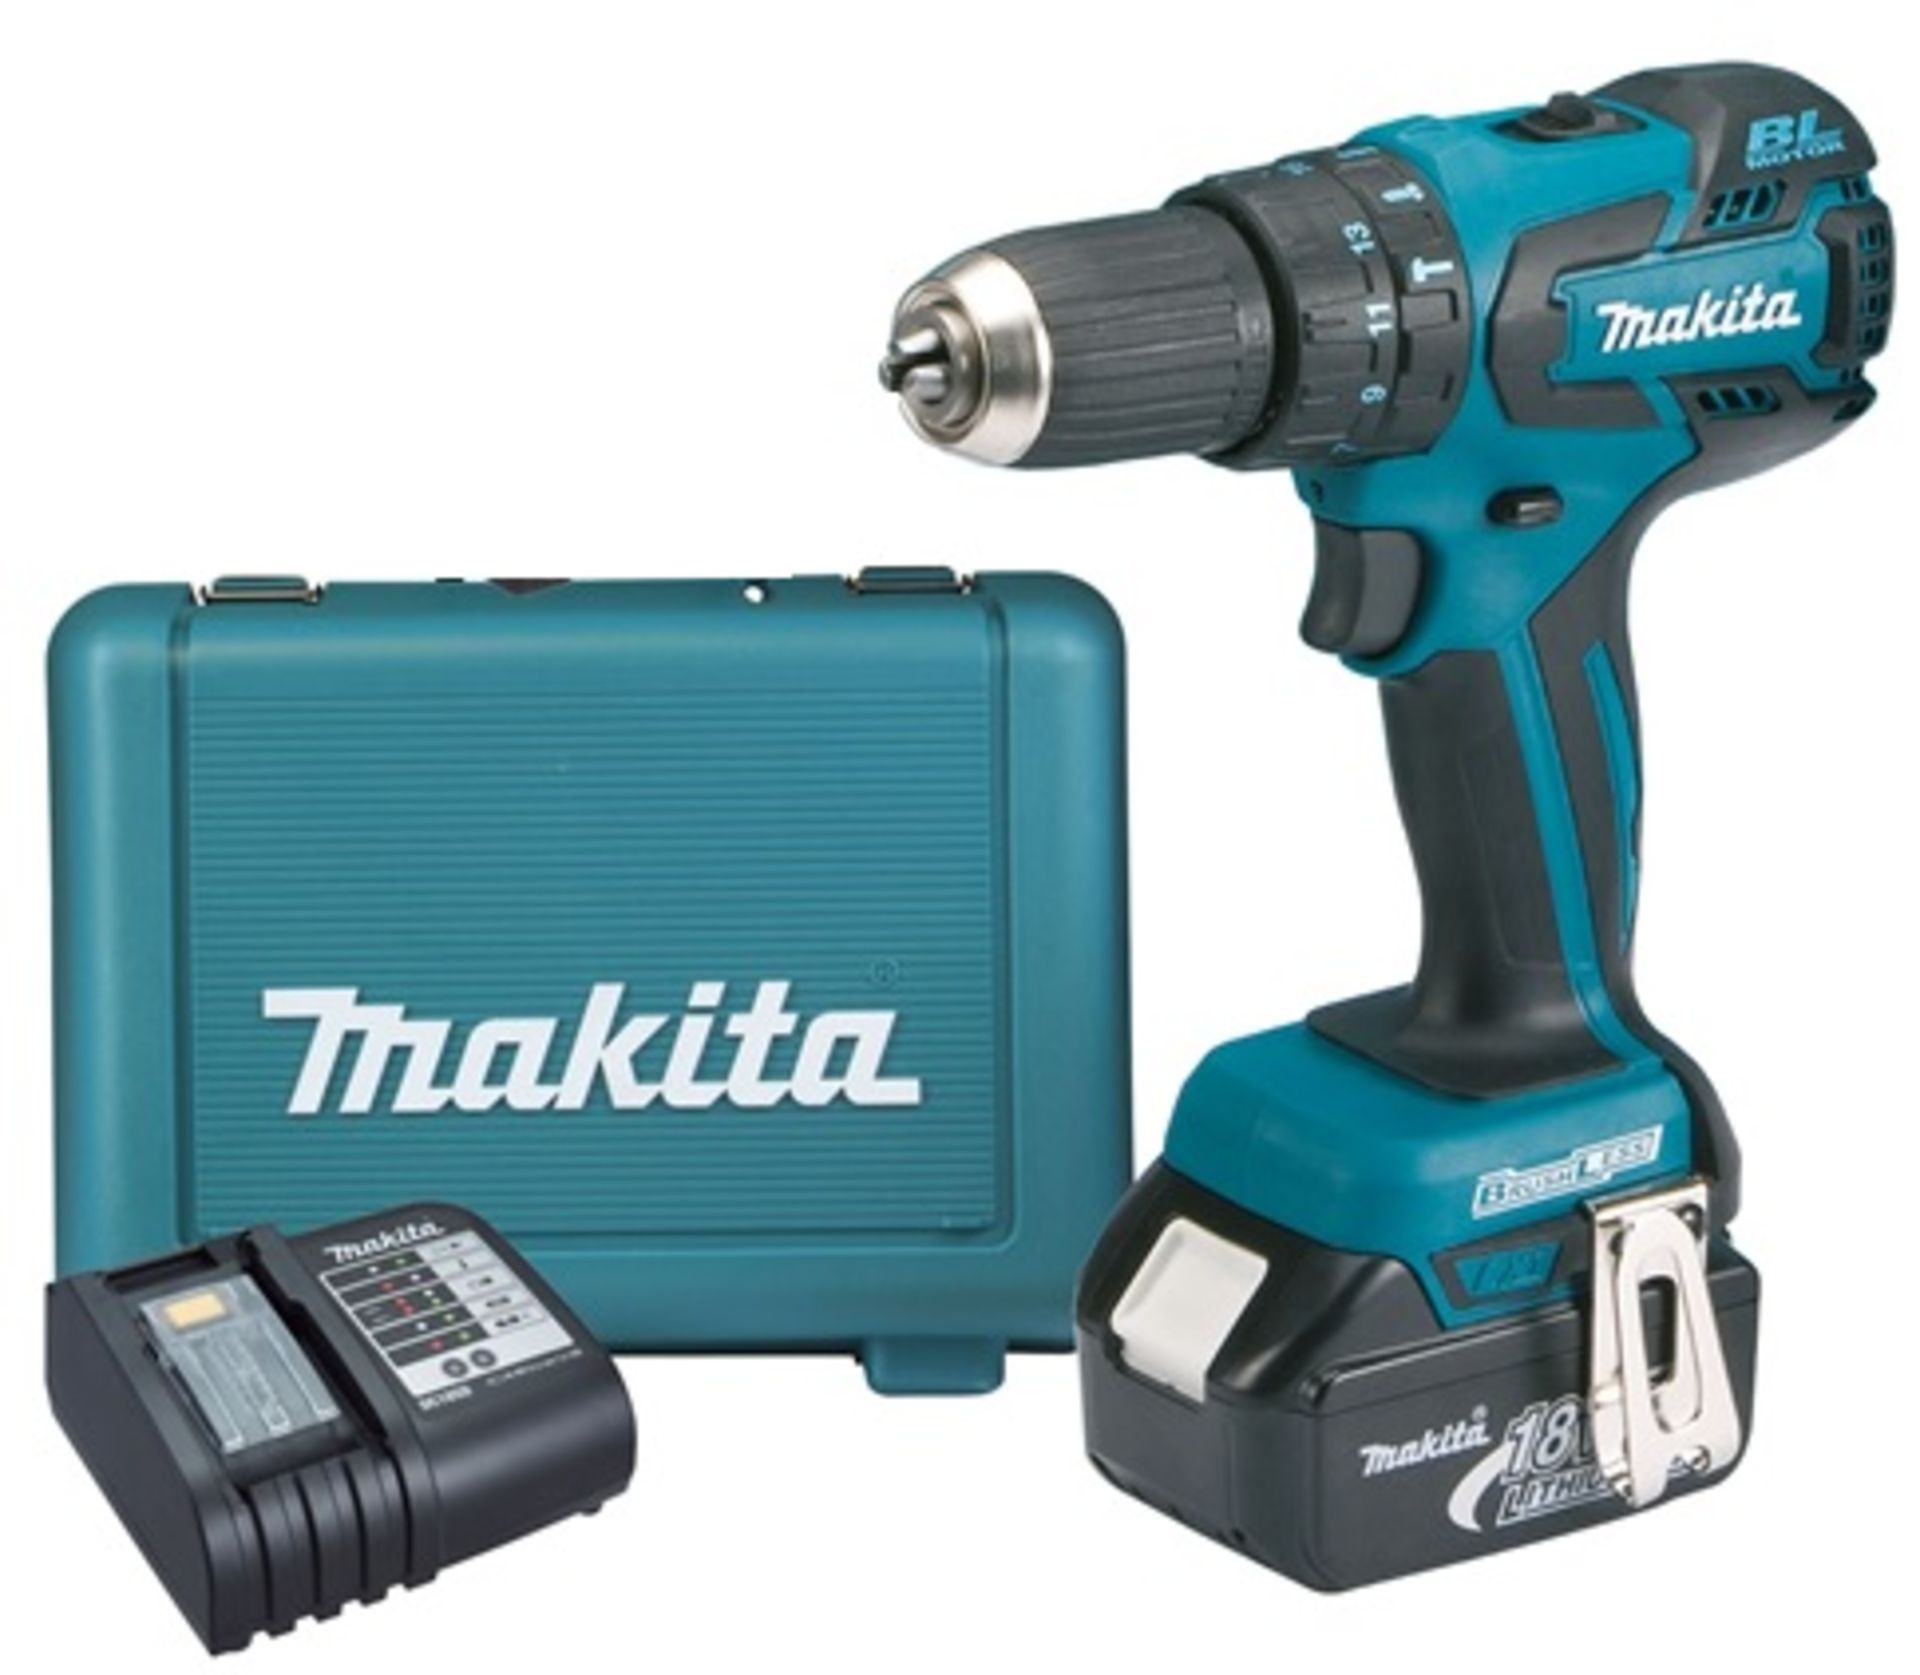 + VAT Brand New Makita 18v Brushless Combi Drill (All Metal Gearing) + 4Ah Battery + Charger +